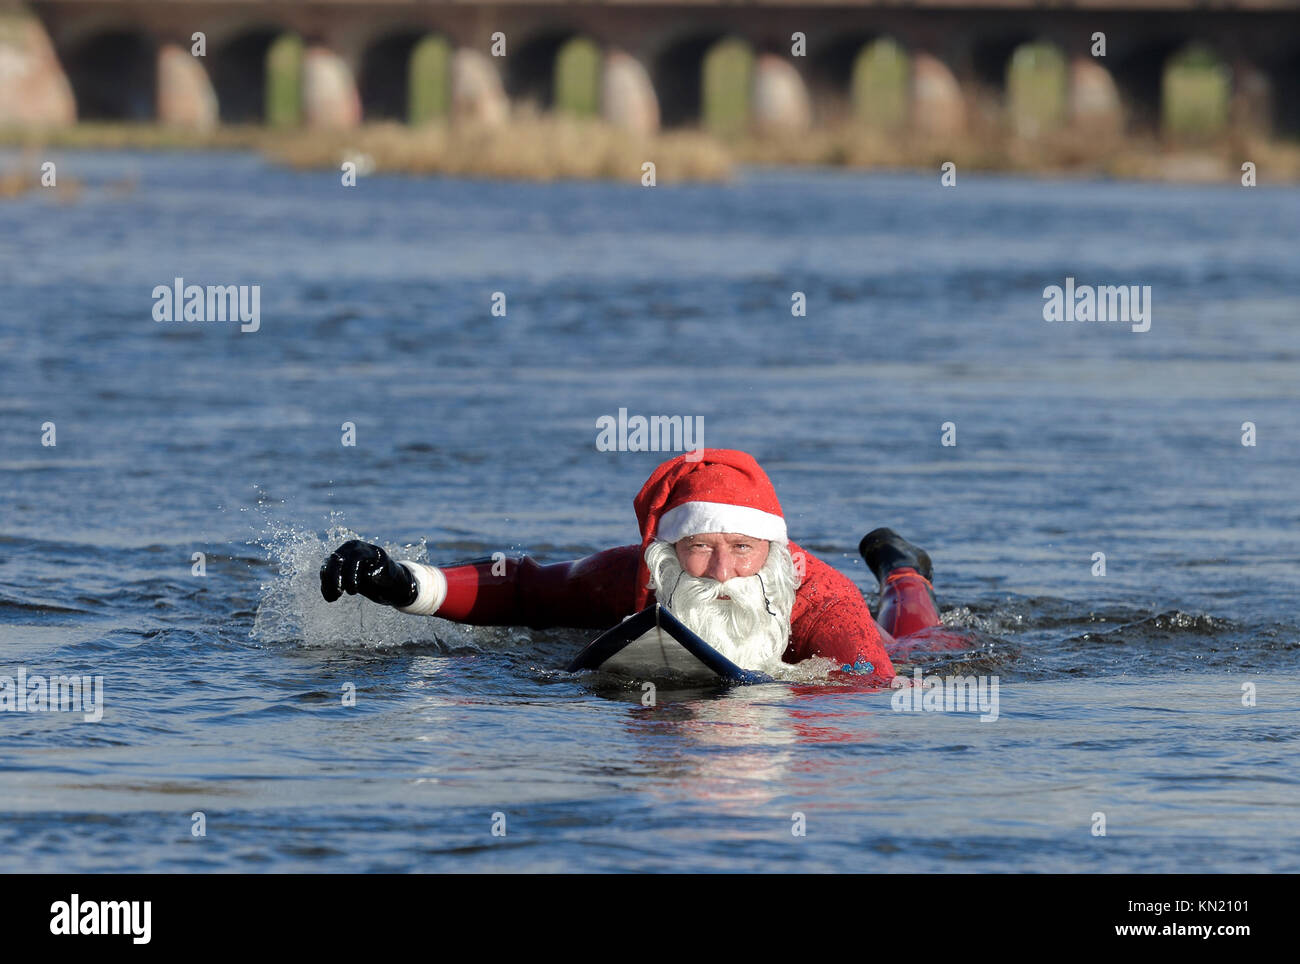 Rastatt, Germany. 09th Dec, 2017. The cold temperatures could not restrain Surfer Thomas Schmidt (50) from Rastatt in Germany going in the Murg-River in Rastatt to engage his passion Surfing. Dressed in a red neoprene Santa Claus suit Credit: dpa picture alliance/Alamy Live News Stock Photo